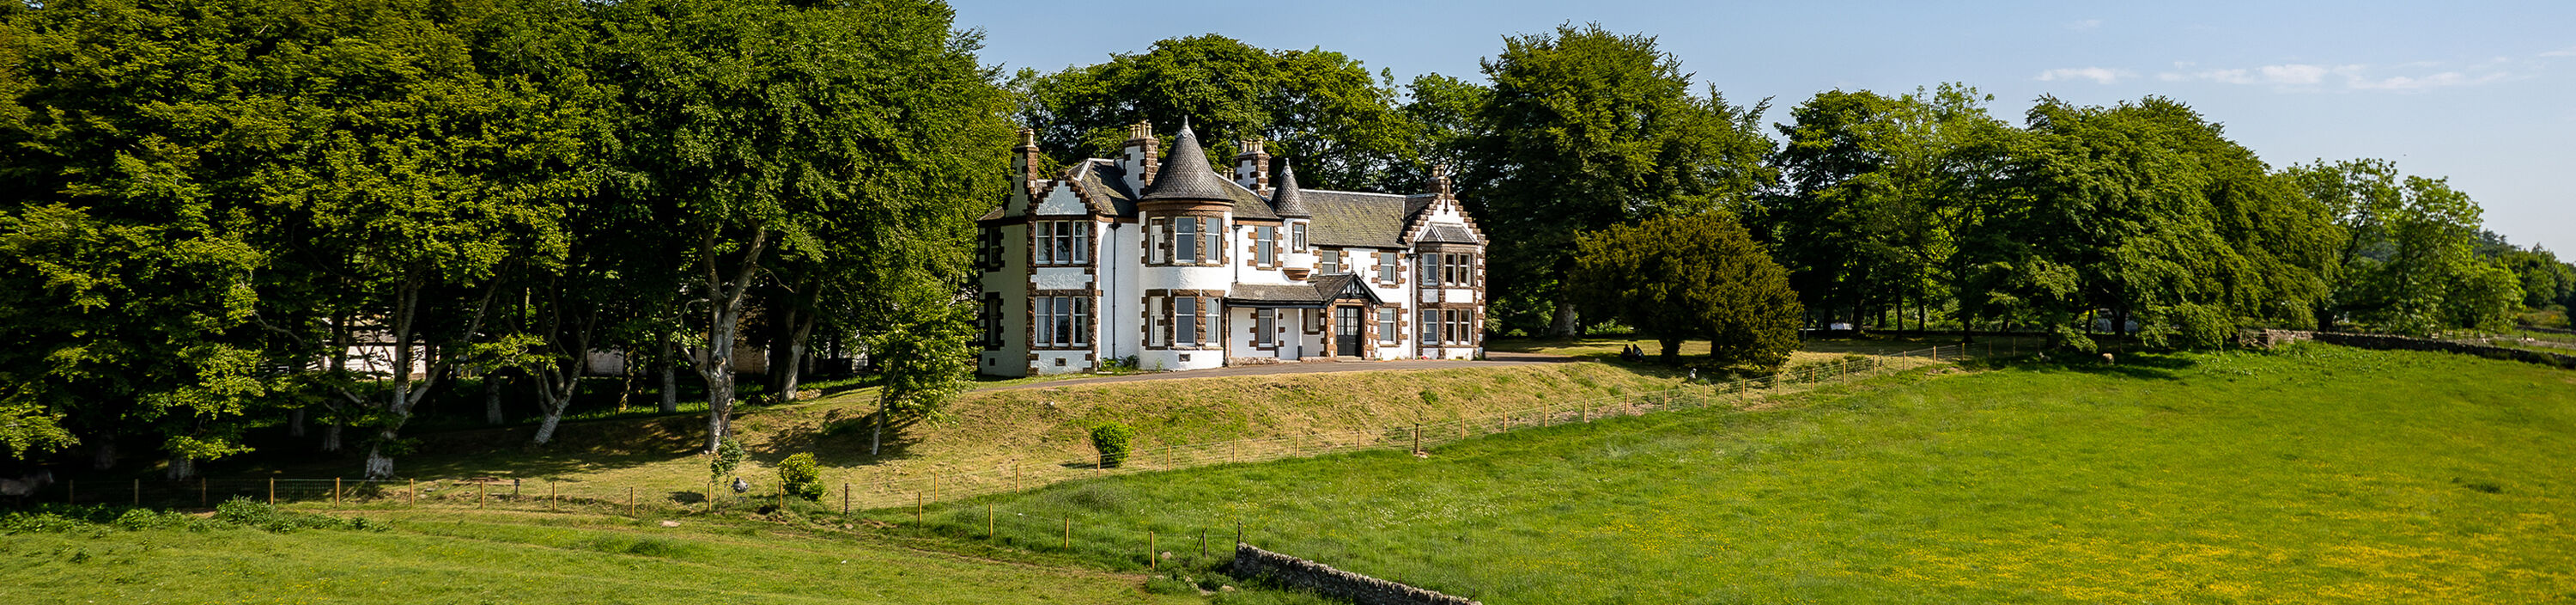 Kinclune House towered and turreted baronial mansion